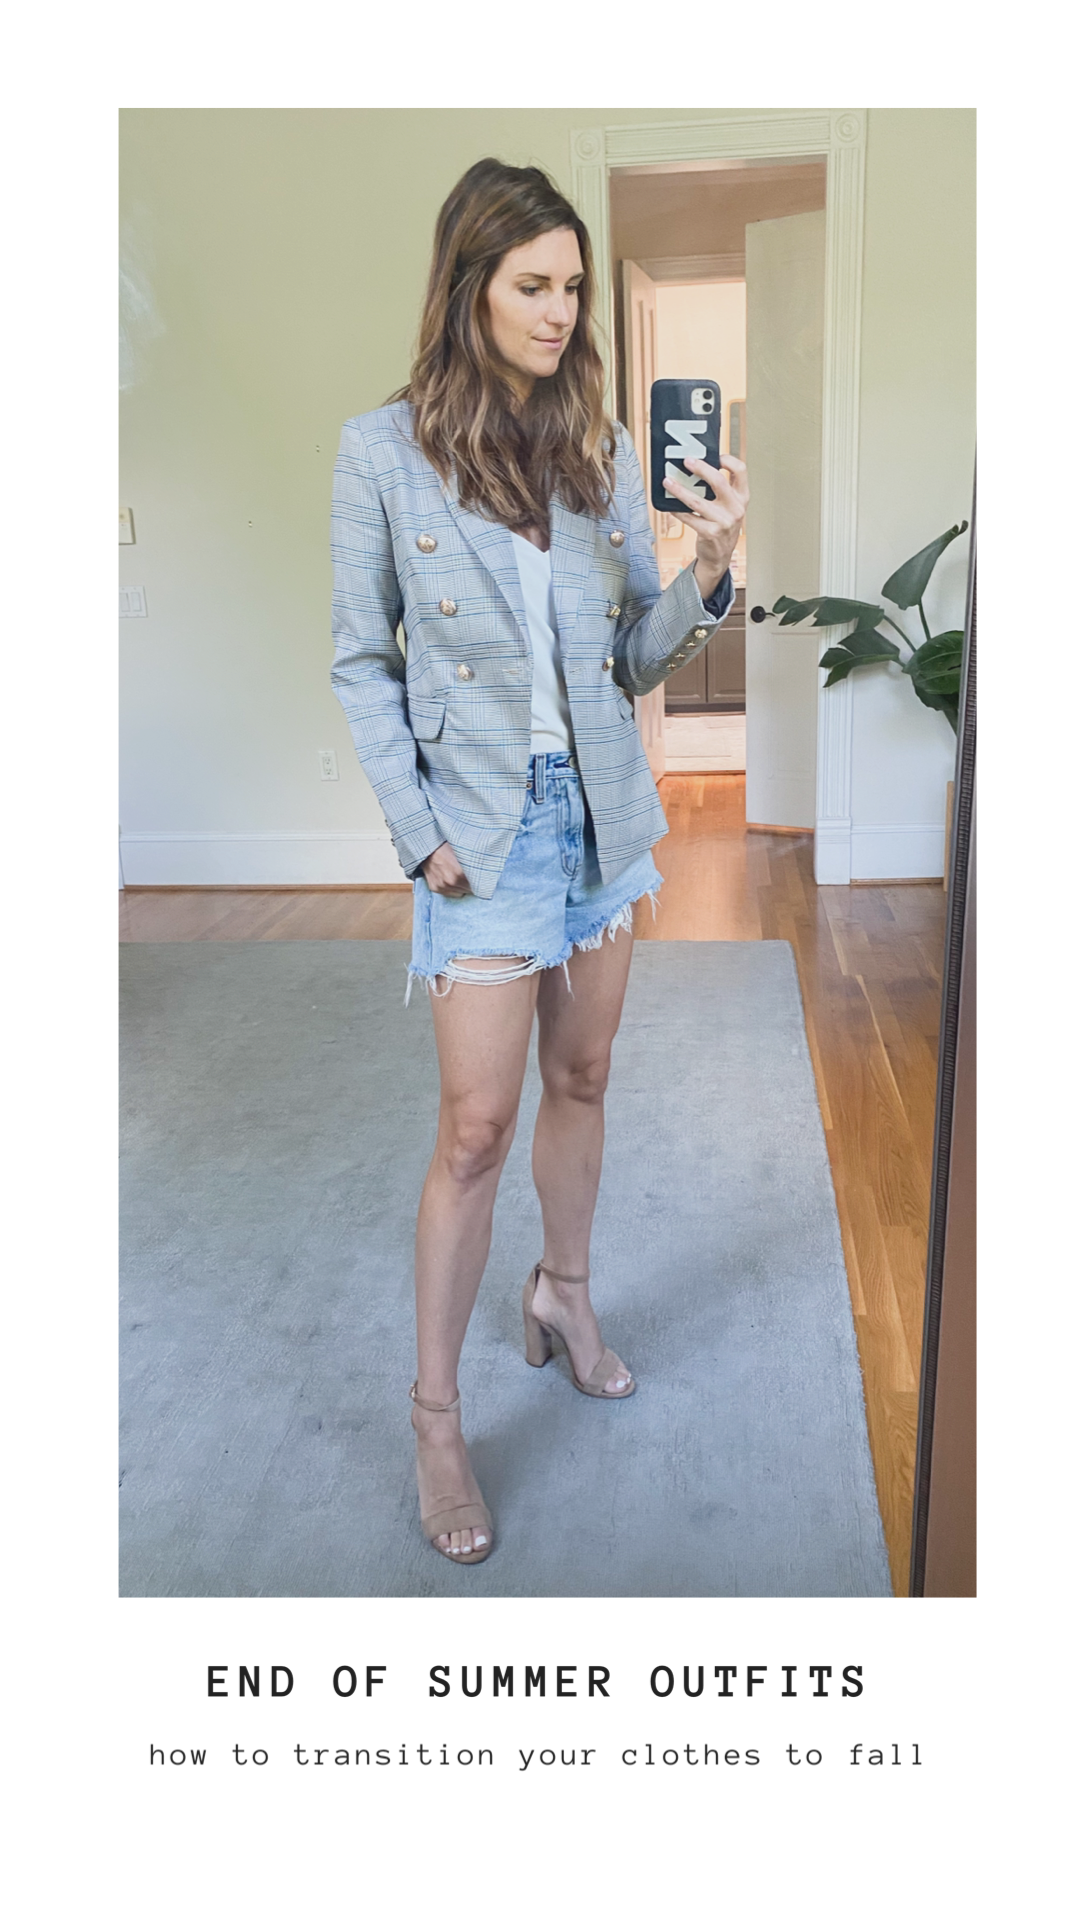 Blazers for end of summer, transition outfits from summer to fall, finding beauty mom outfit ideas